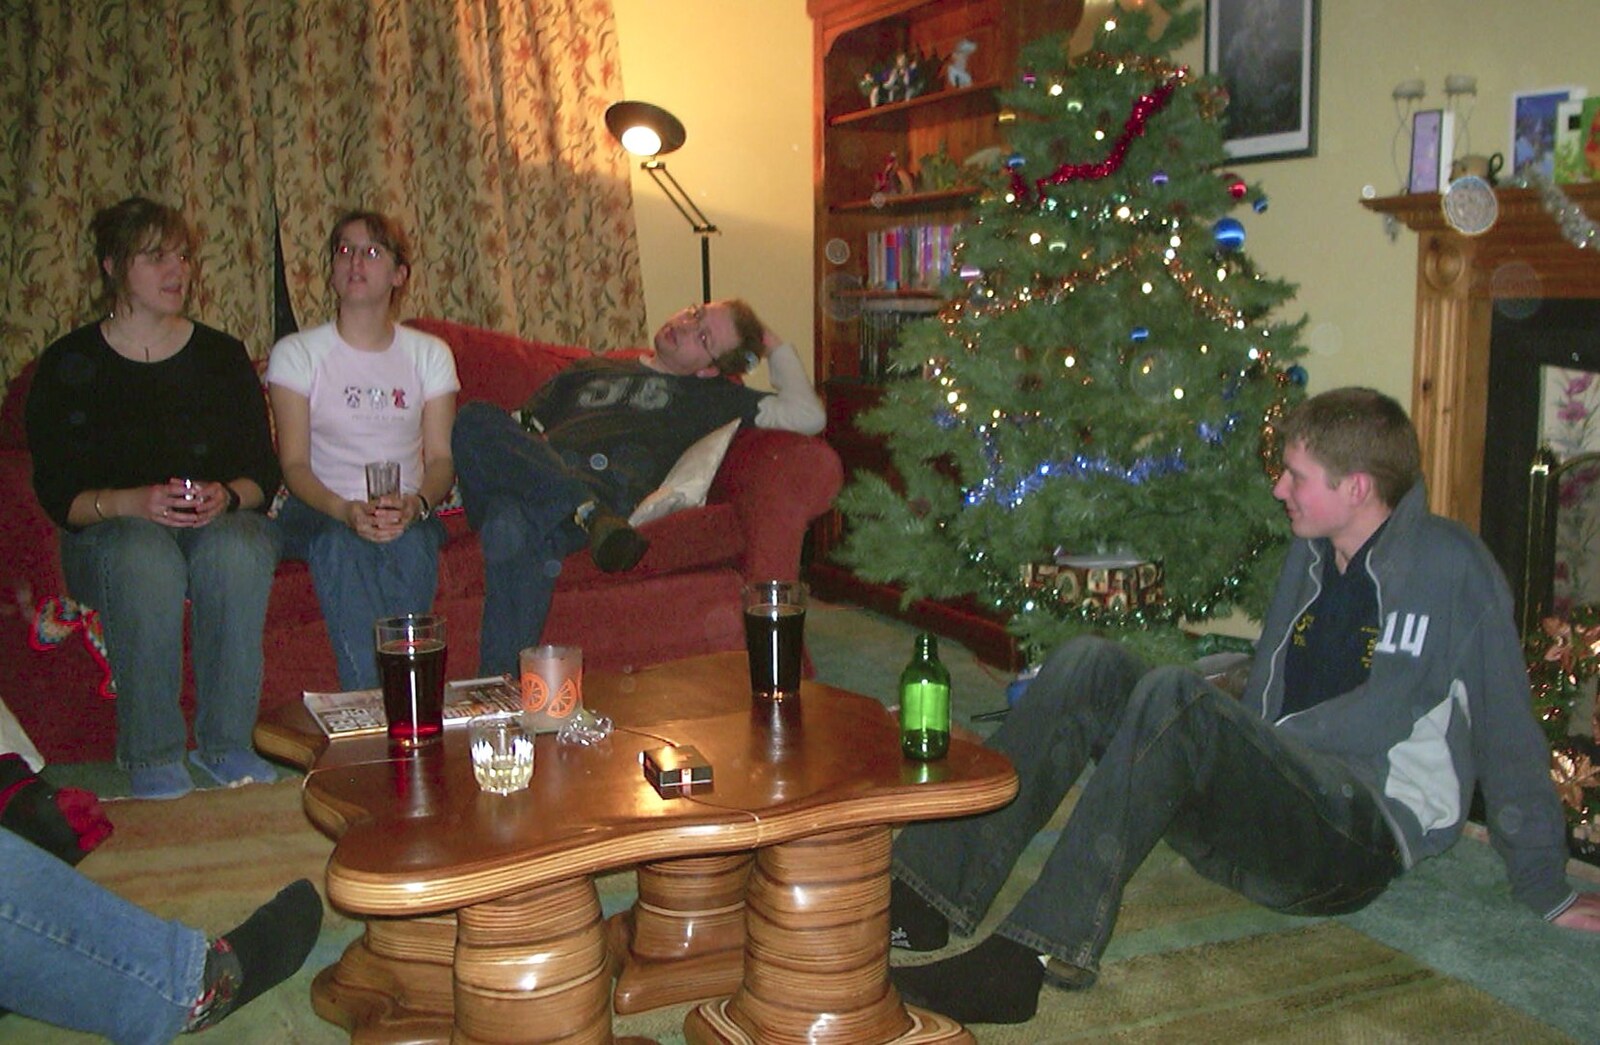 Hanging out by the Christmas tree from Sarah's Games Night at Anne's, Thornham, Suffolk - 27th December 2003